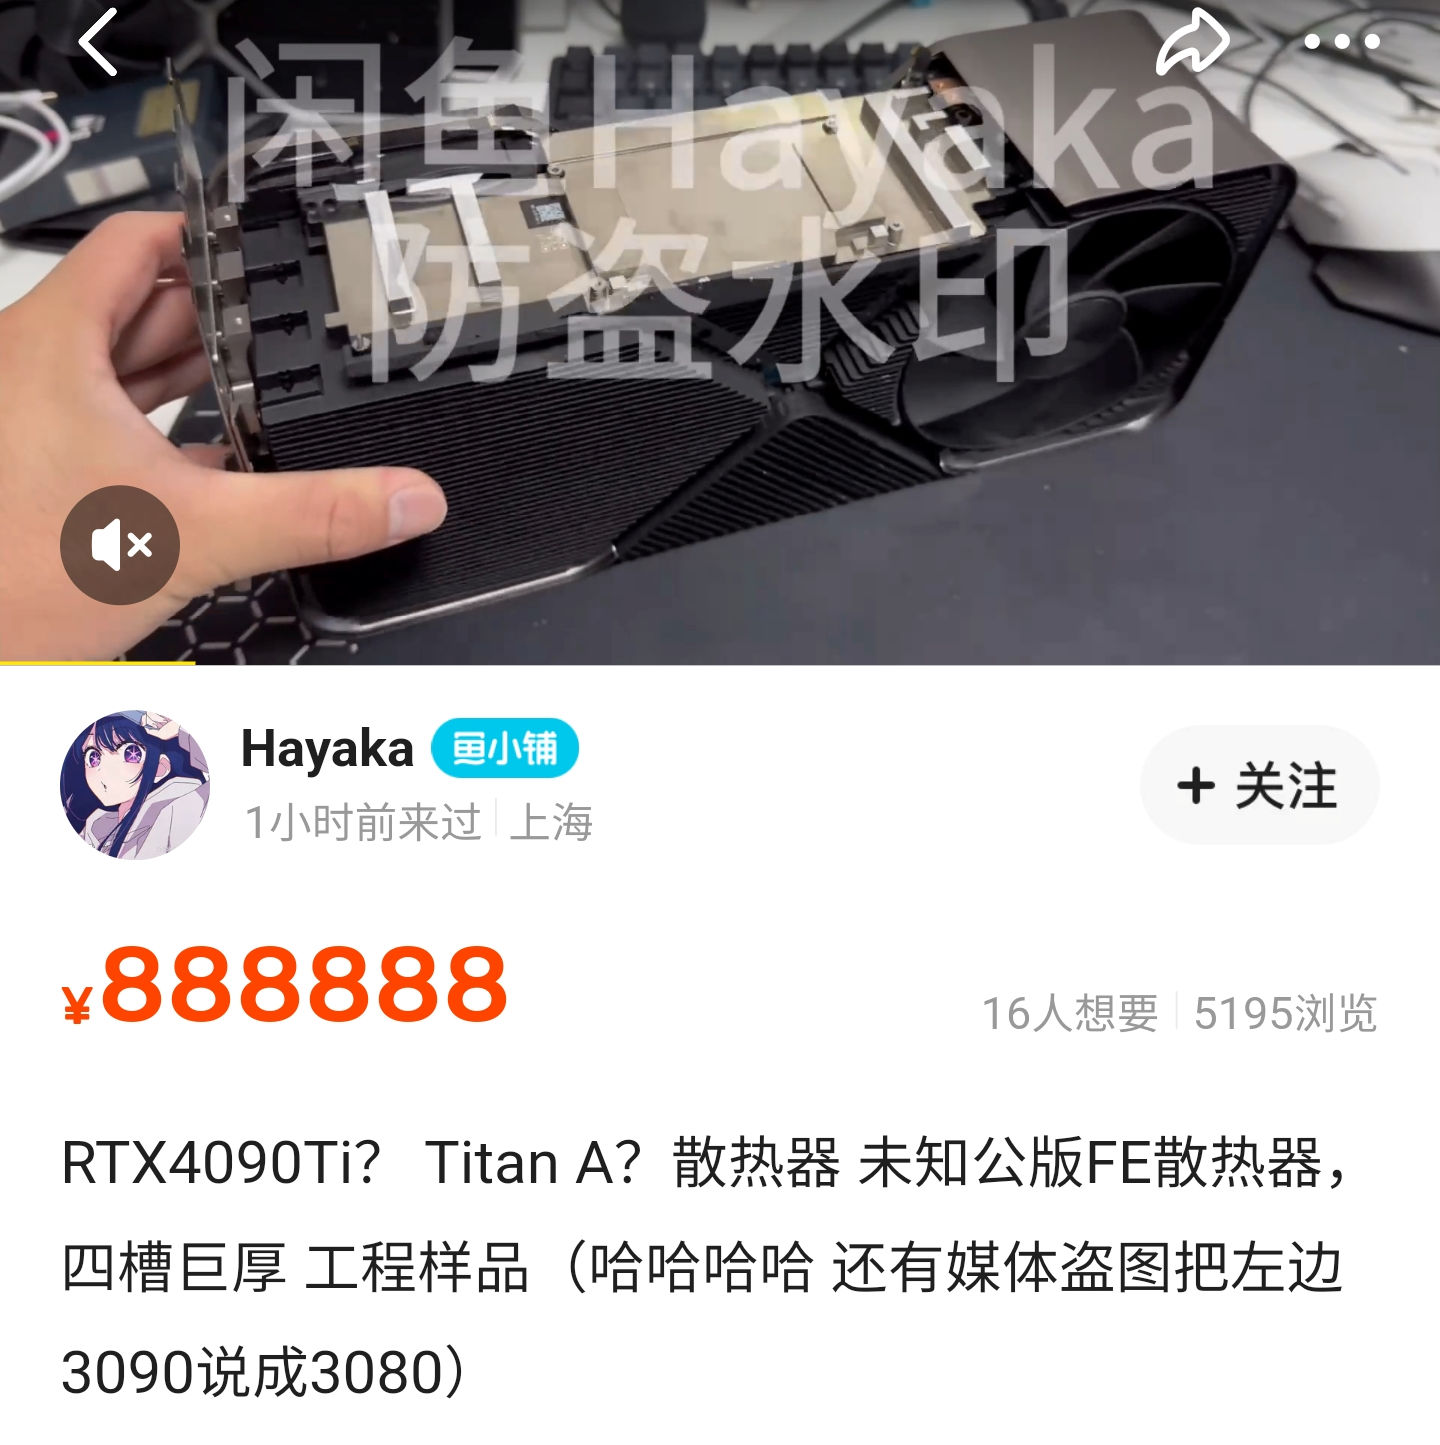 NEW RTX 4090 Ti And Titan Are MONSTERS! 